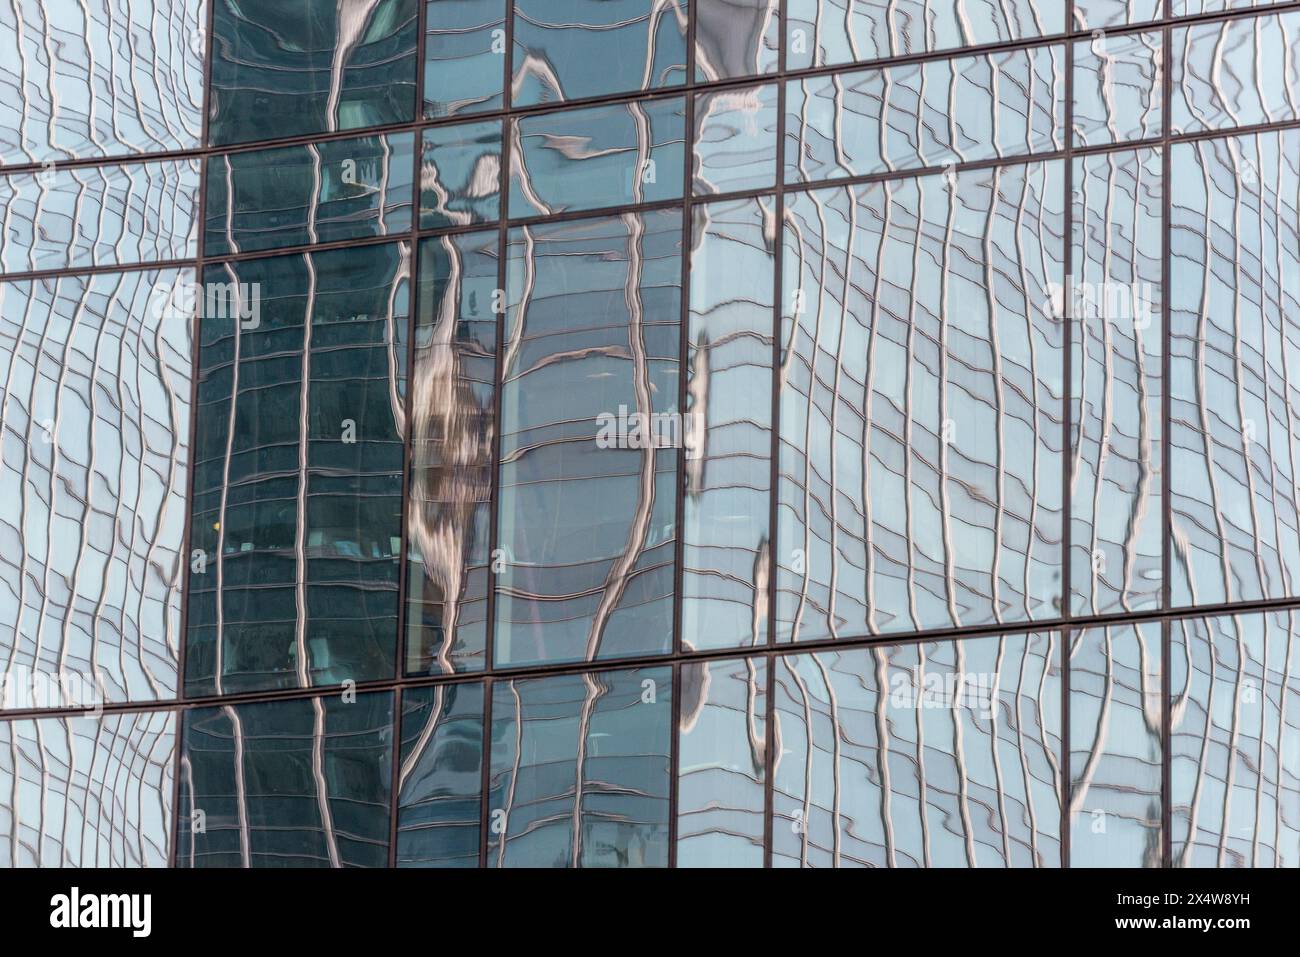 The reflection of a building in the glass window of a building. The reflection is distorted and wavy, giving the impression of a water surface Stock Photo